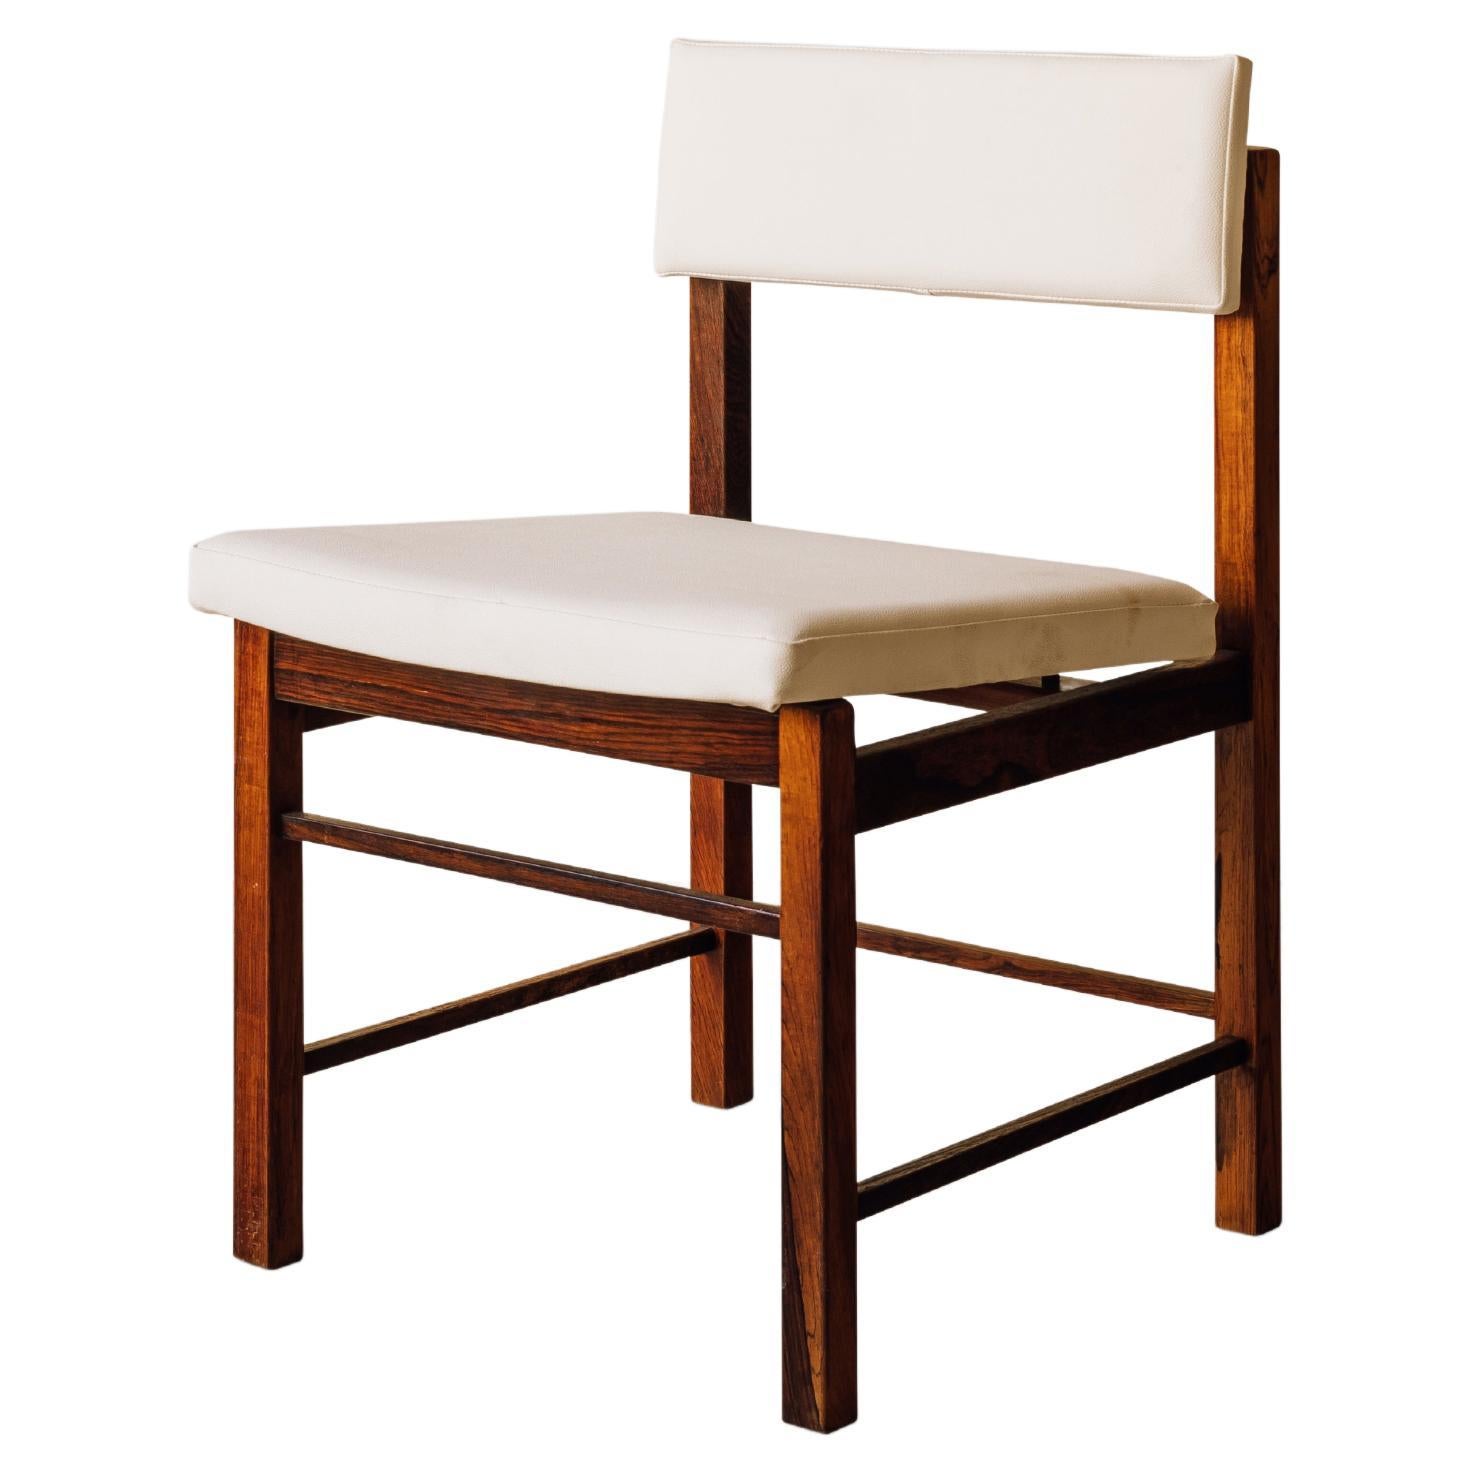 Tiao Dining Chair by Sergio Rodrigues, 1959